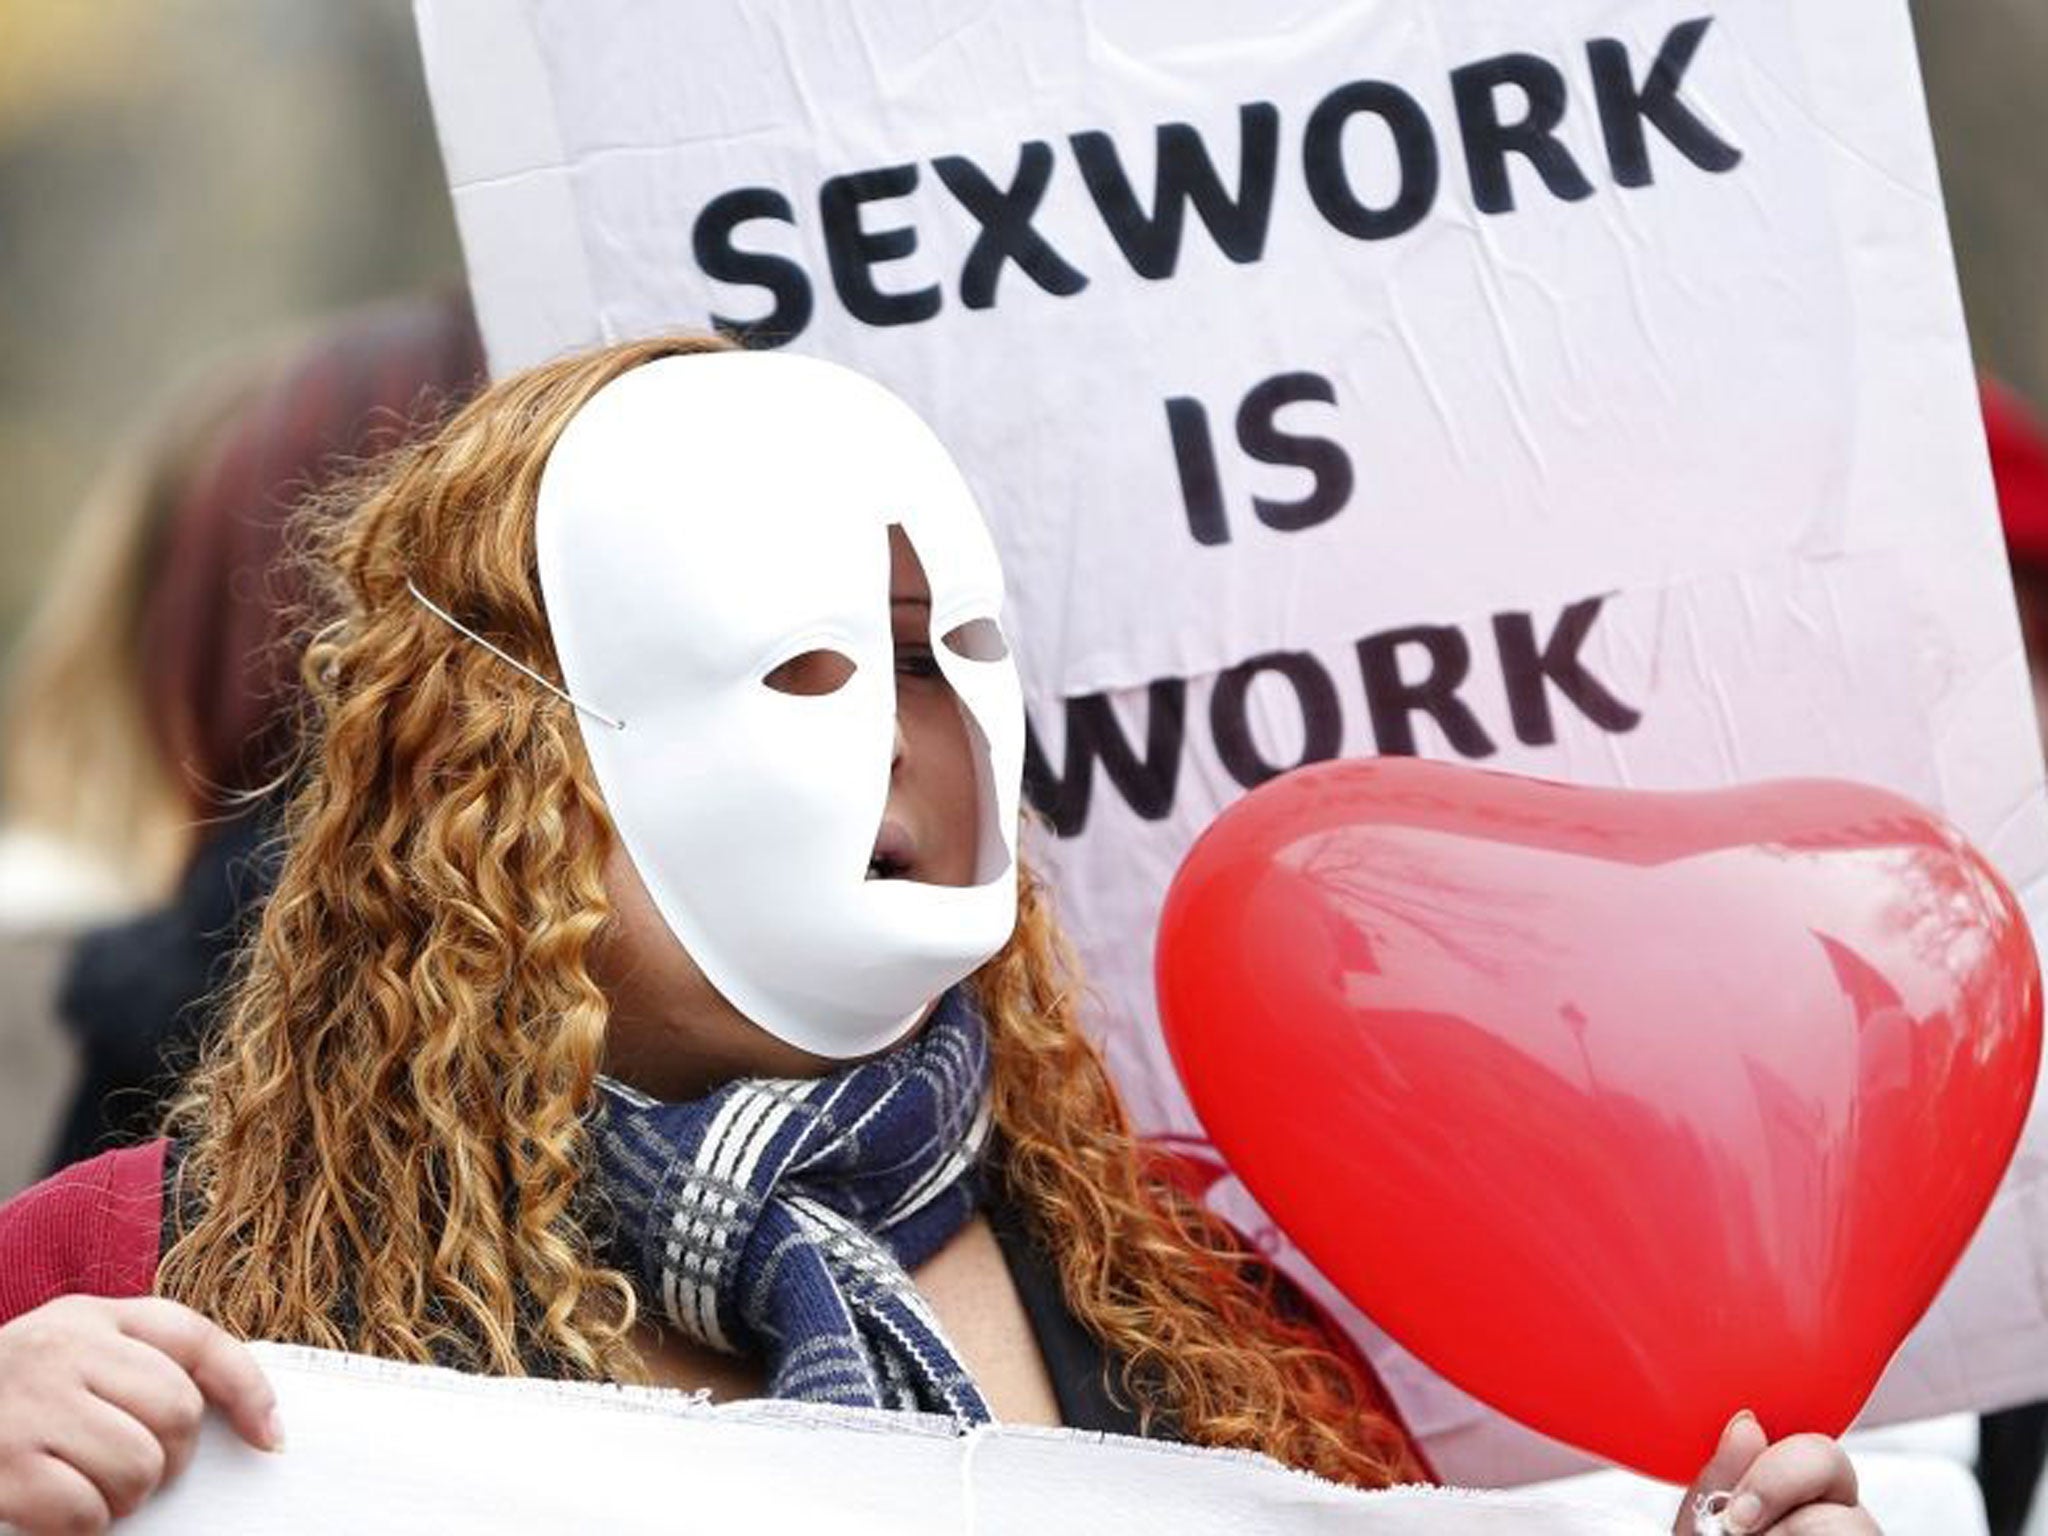 The English Collective of Prostitutes, a leading campaign group which supports the decriminalisation of prostitution, said hundreds of teaching assistants, waitresses, cleaners, and beauticians had made inquiries about starting sex work for the first time since the Covid emergency hit in spring